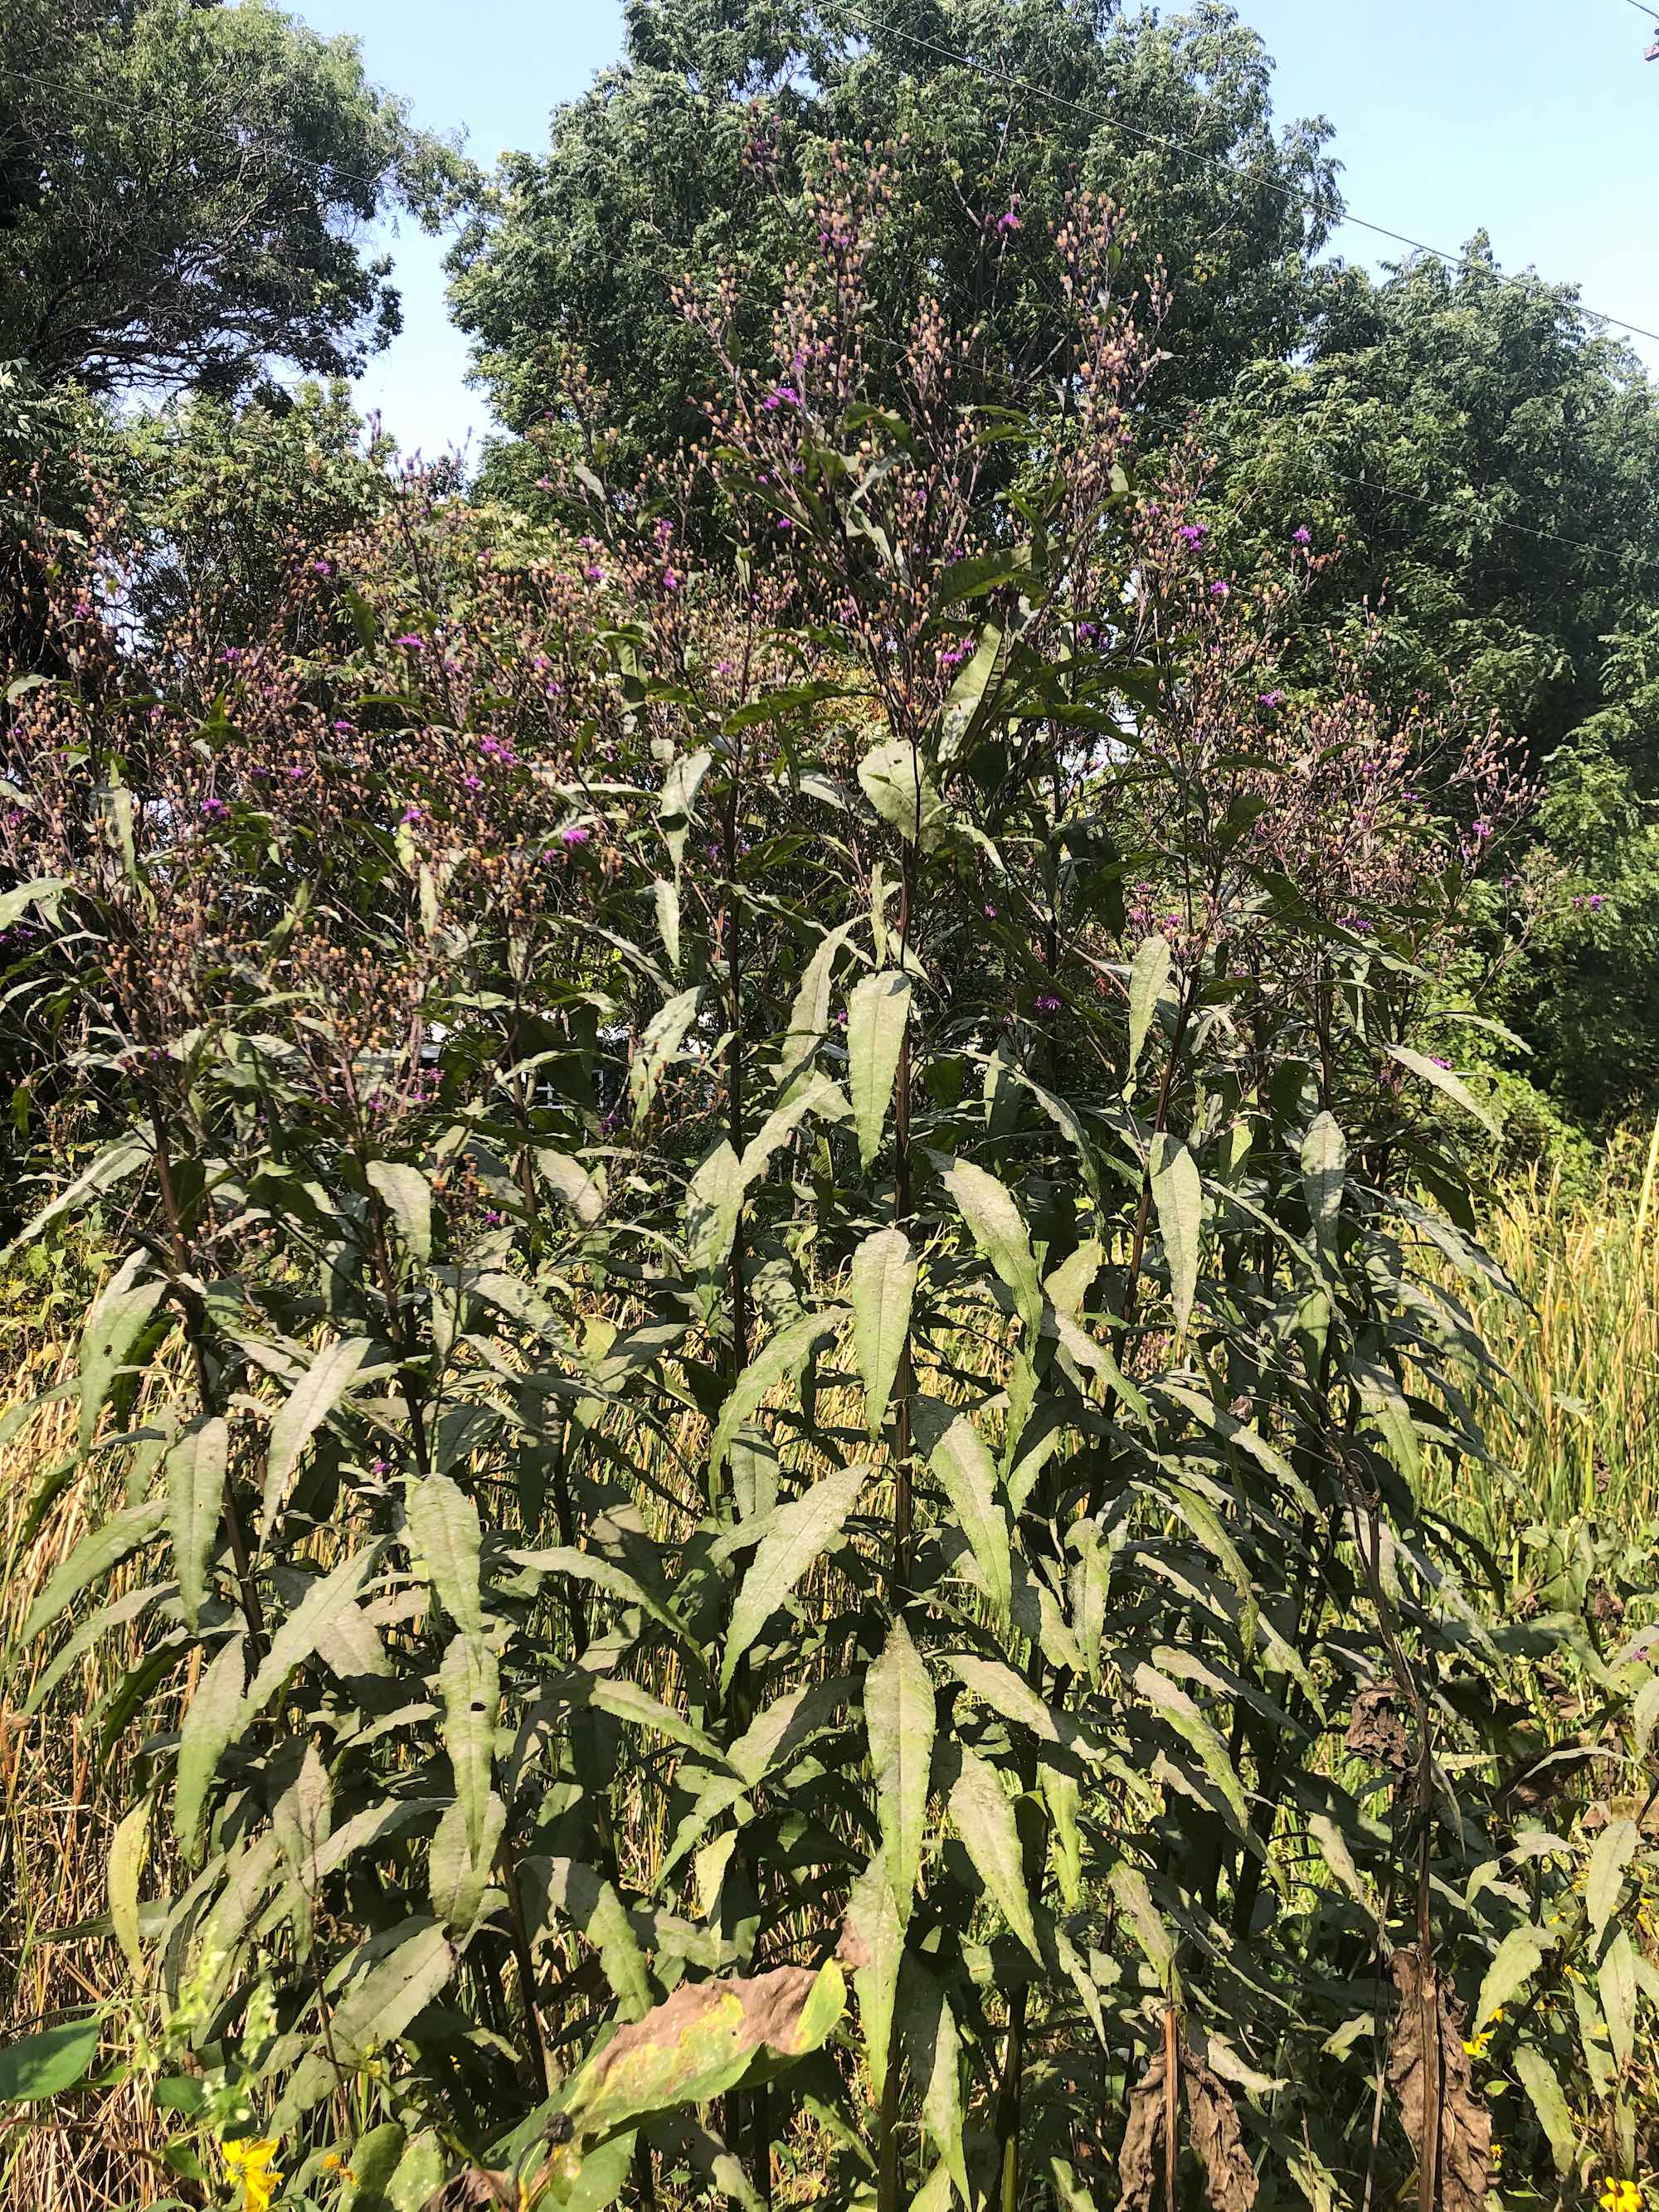 Tall Ironweed in drainage ditch along bikepath between Midvale Blvd. and the Beltline on September 15, 2020.